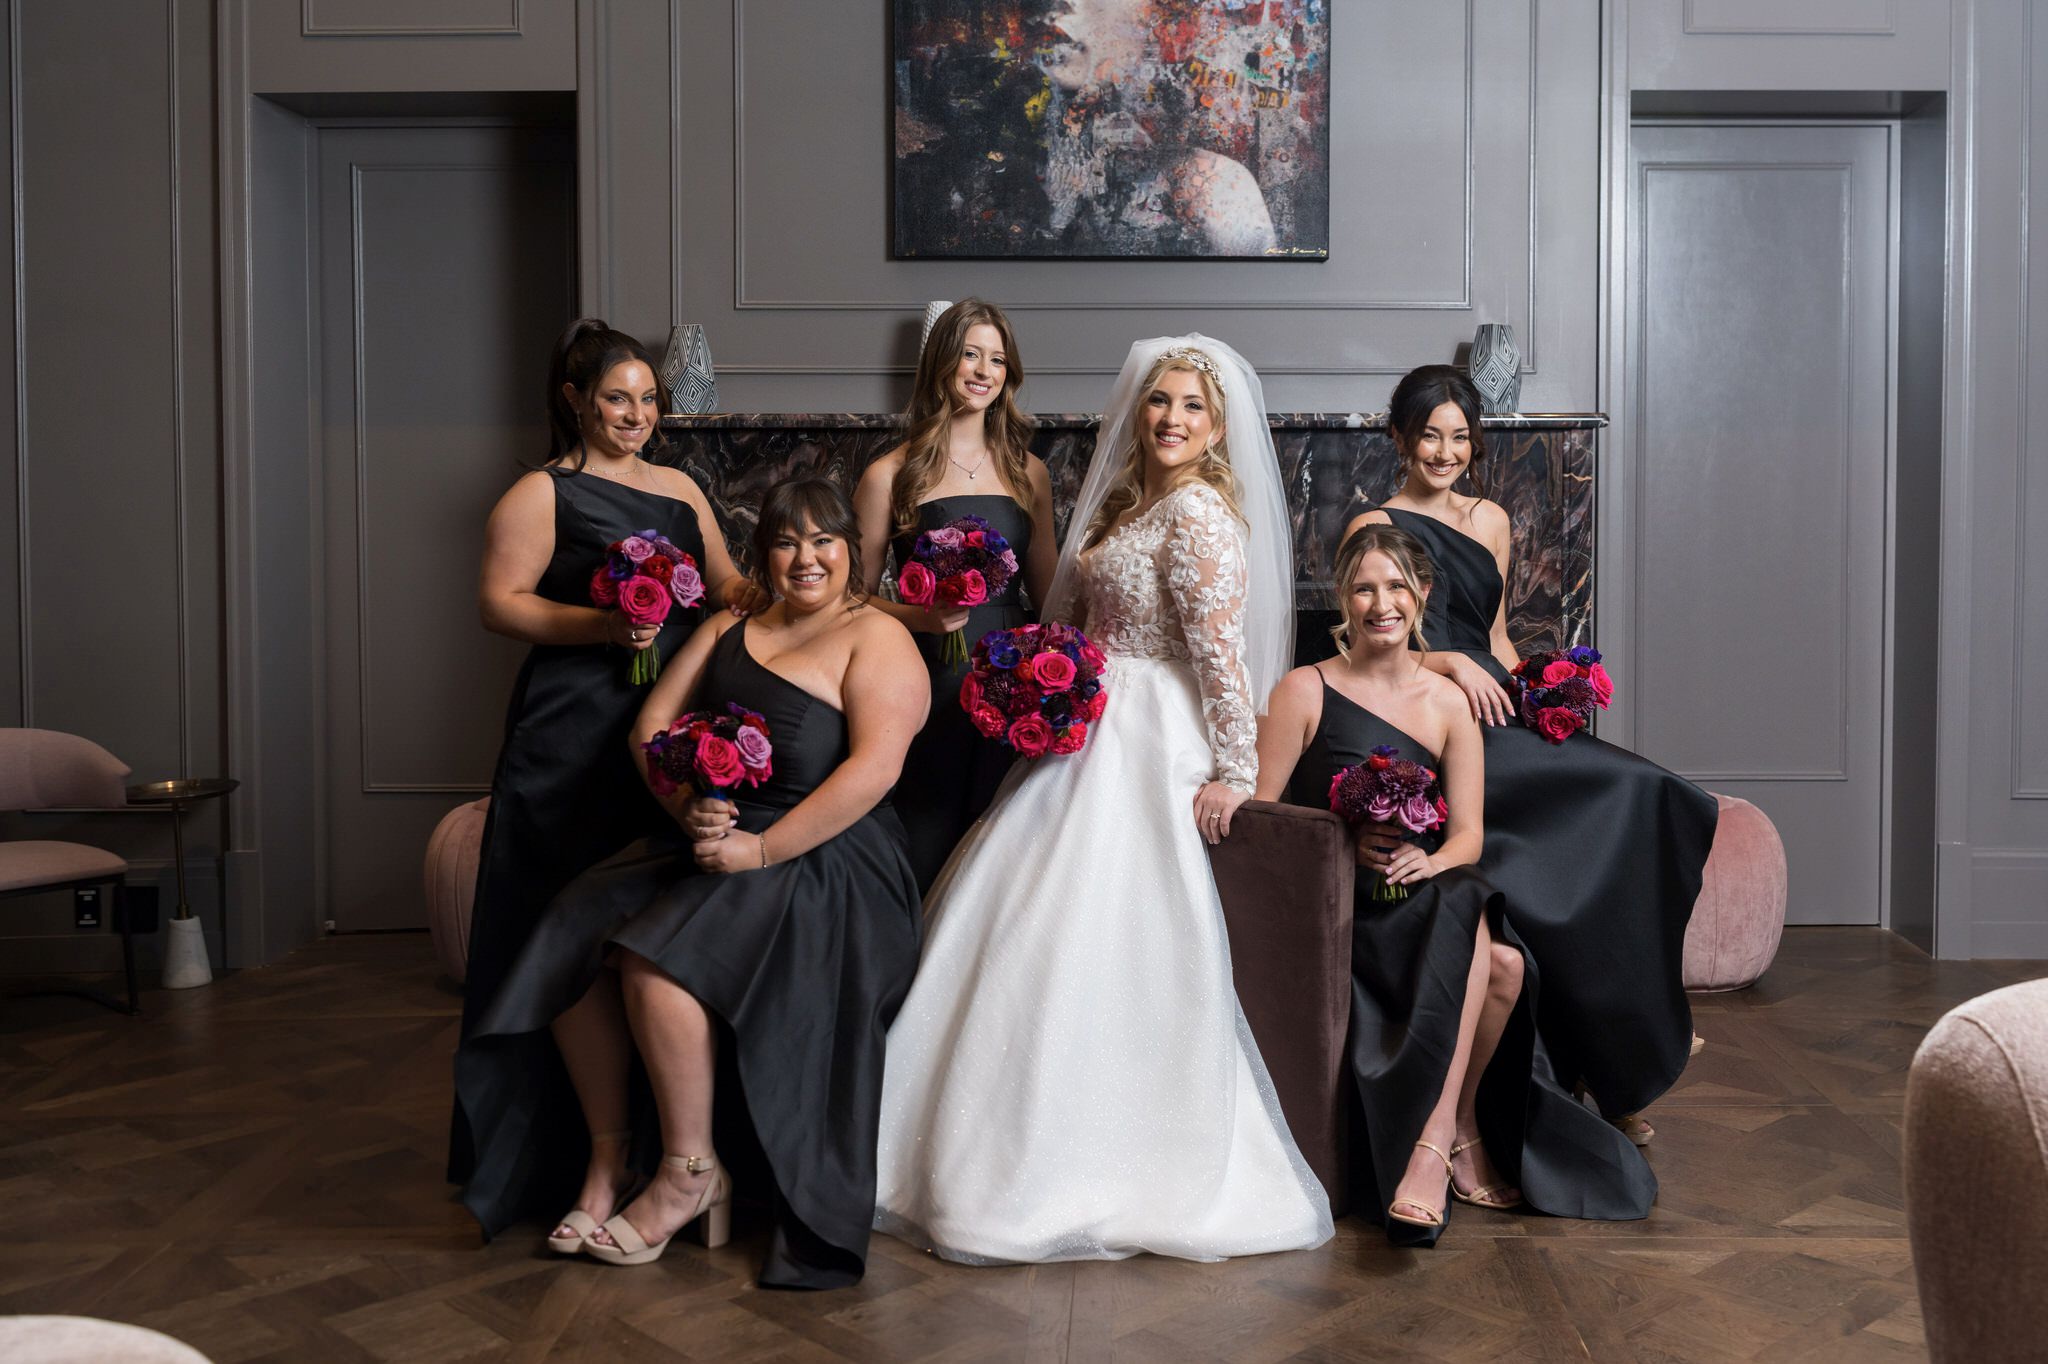 A bride poses with her bridesmaids on her wedding day at the Daxton Hotel in Birmingham, MI.  